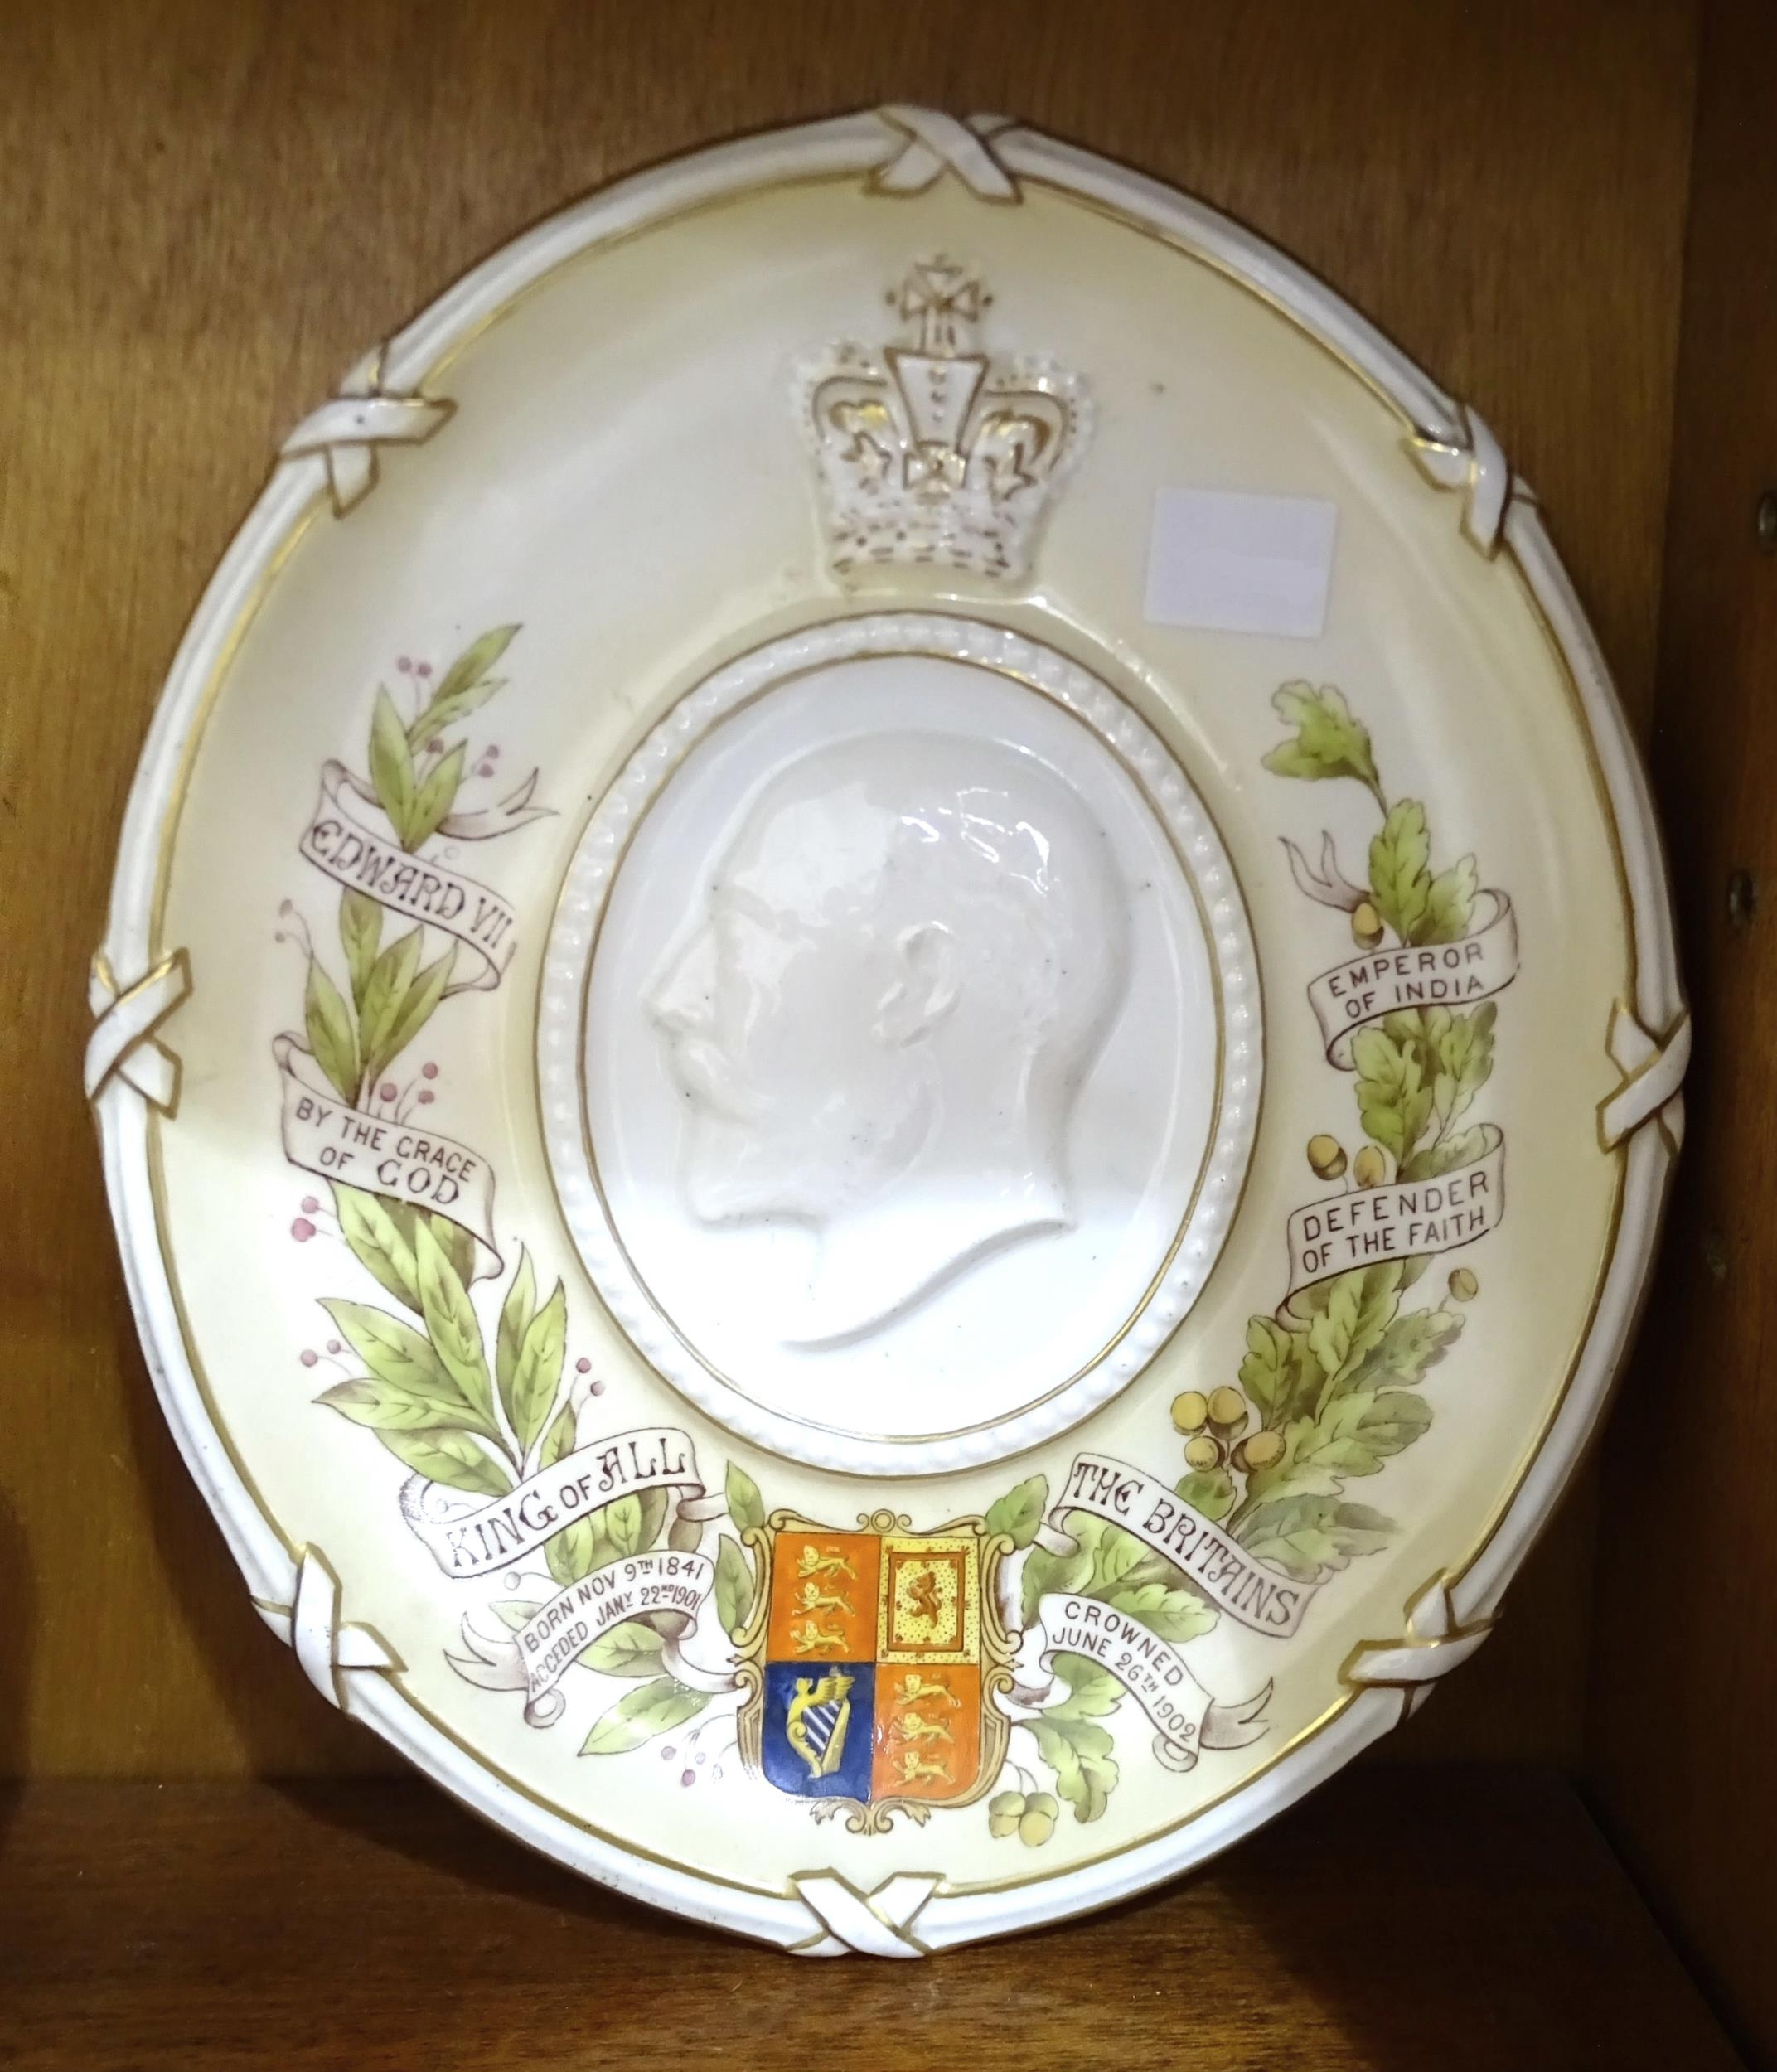 An oval commemorative plaque depicting Edward VII, 26 x 22cm, a Queen Victoria jubilee ring, a